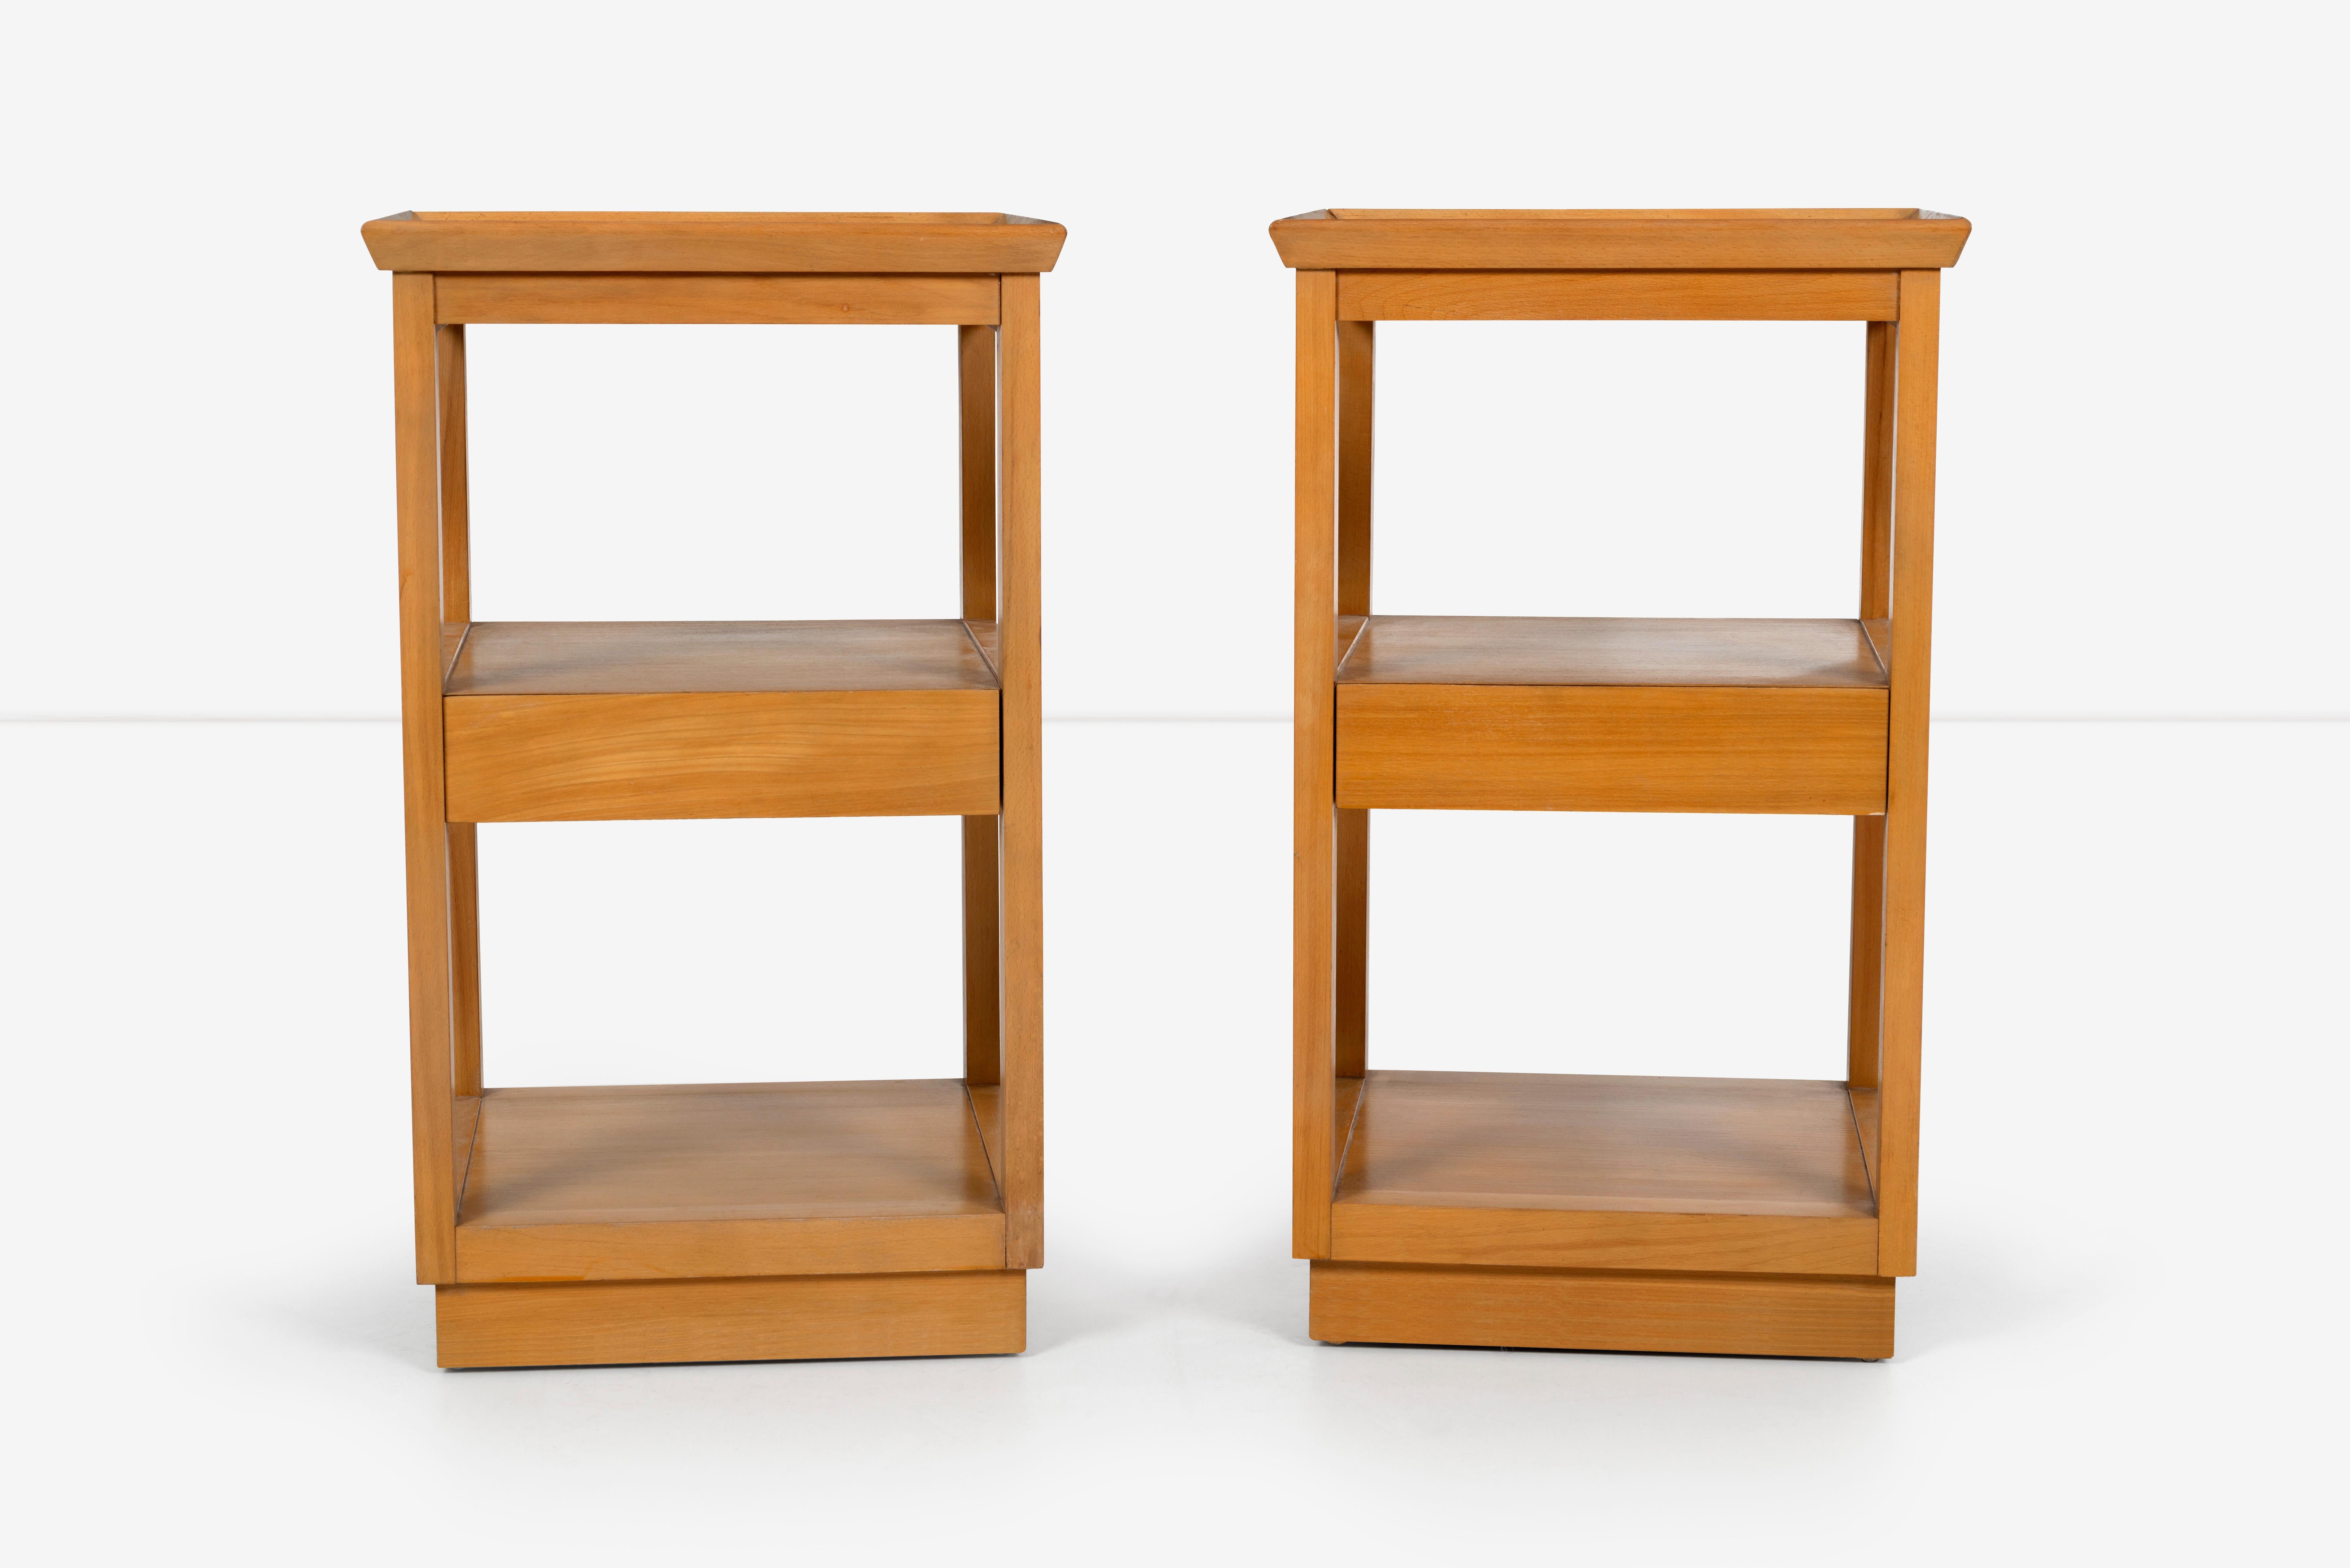 Pair of Edward Wormley end tables, elmwood structures with pull-out drawer.
Perfect scale for this tight spaces with Minimalist esthetic.
Manufacturers stamp inside drawer.